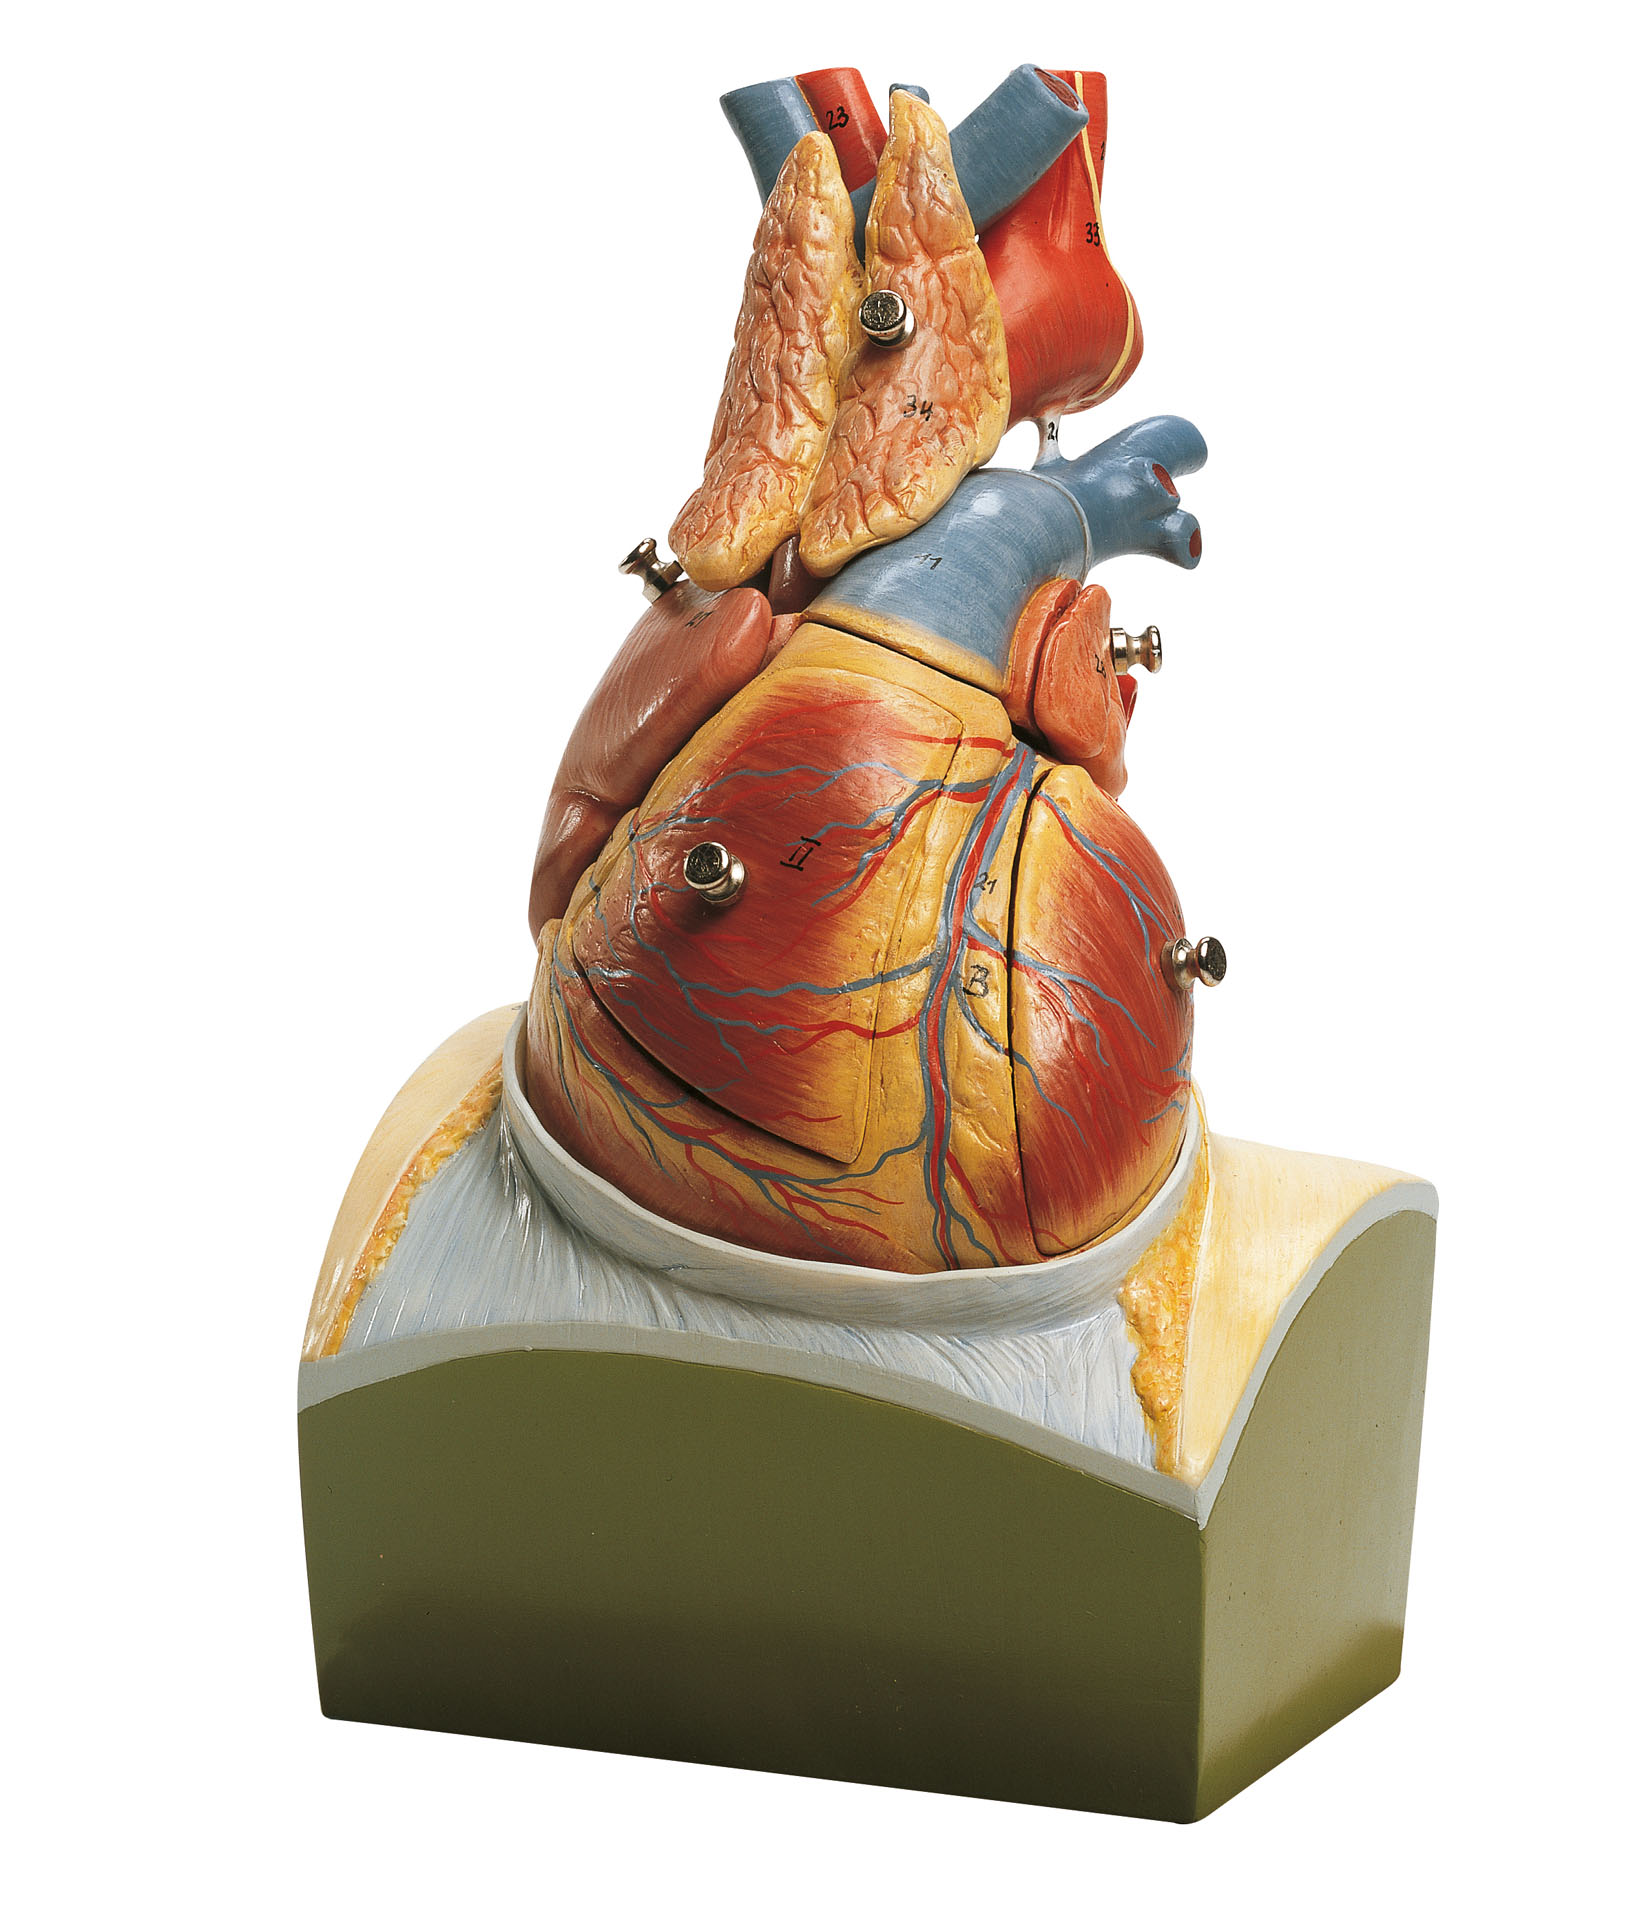 Heart on Diaphragm Base – Separates Into 8 Parts